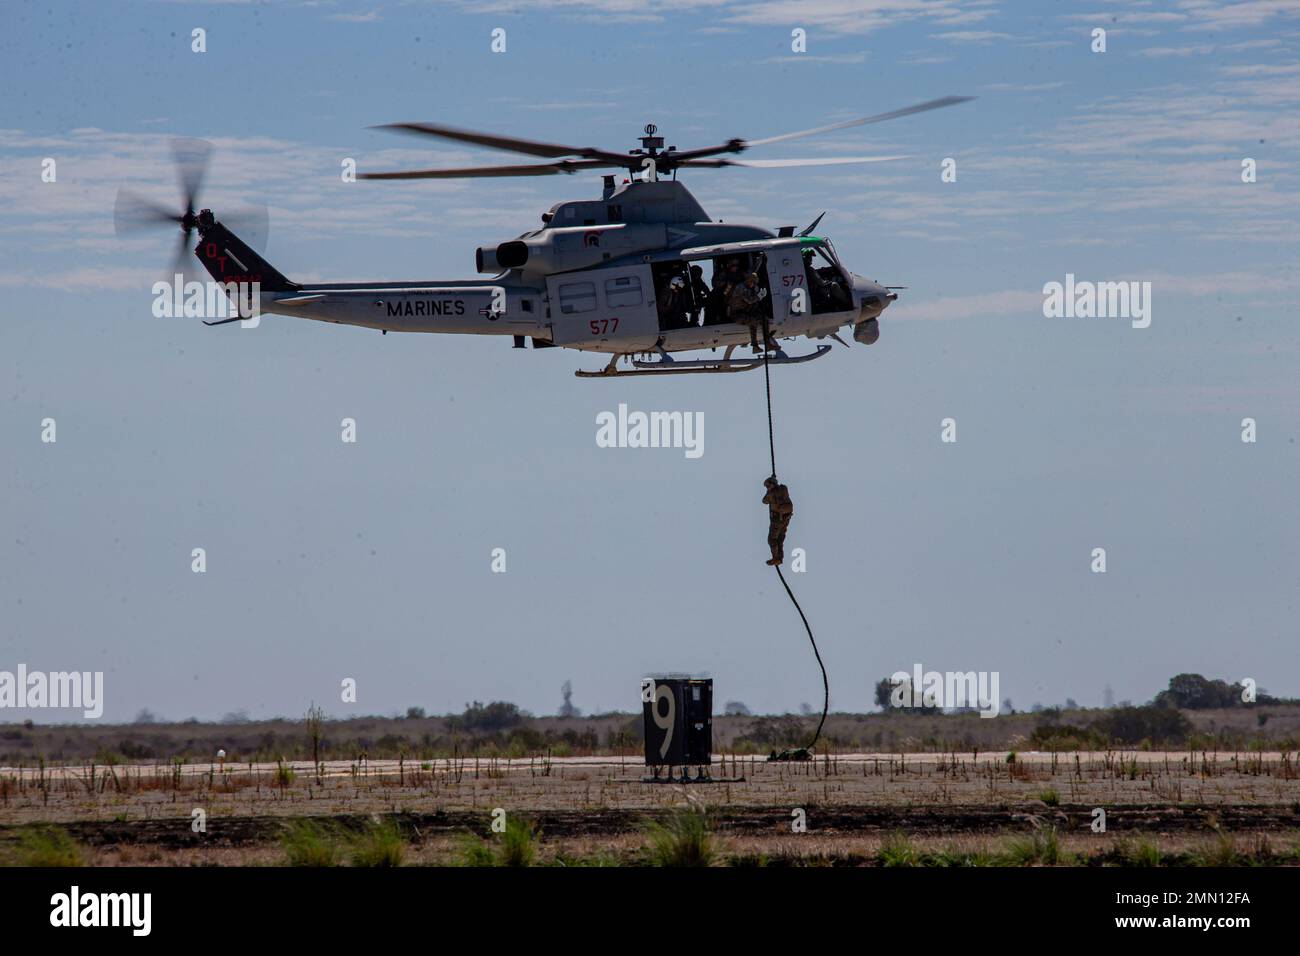 U.S. Marines with 1st Recon Battalion, 1st Marine Division fast rope out of a Bell UH-1Y Venom during the Marine Air-Ground Task Force demonstration of the 2022 Marine Corps Air Station Miramar Air Show at MCAS Miramar, San Diego, California, Sept. 24, 2022. The MAGTF Demo displays the coordinated use of close-air support, artillery and infantry forces, and provides a visual representation of how the Marine Corps operates. The theme for the 2022 MCAS Miramar Air Show, “Marines Fight, Evolve and Win,” reflects the Marine Corps’ ongoing modernization efforts to prepare for future conflicts. Stock Photo